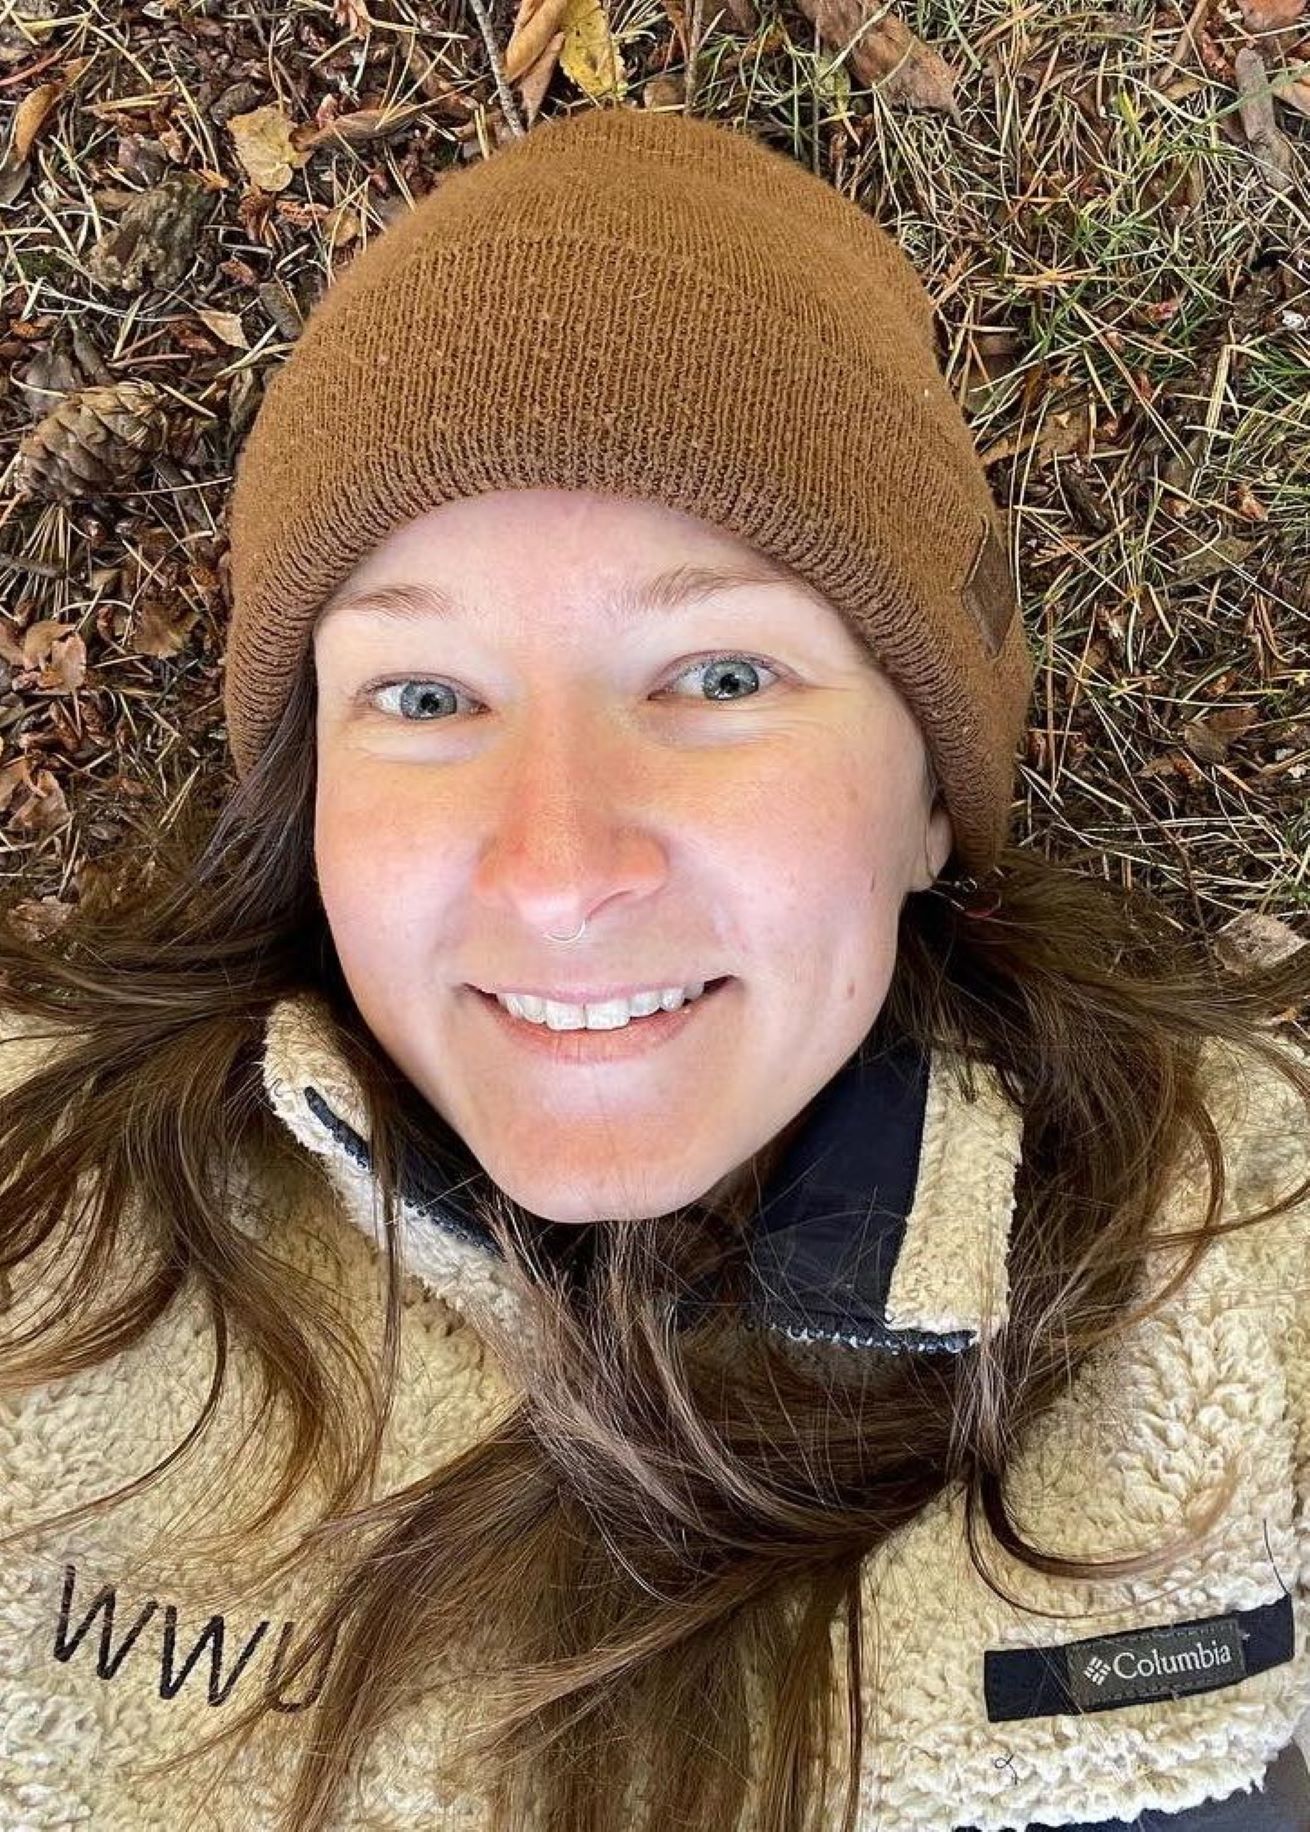 Casey smiling wearing a brown beanie and beige "WWU" pullover, laying on a pile of brown leaves and pine needles